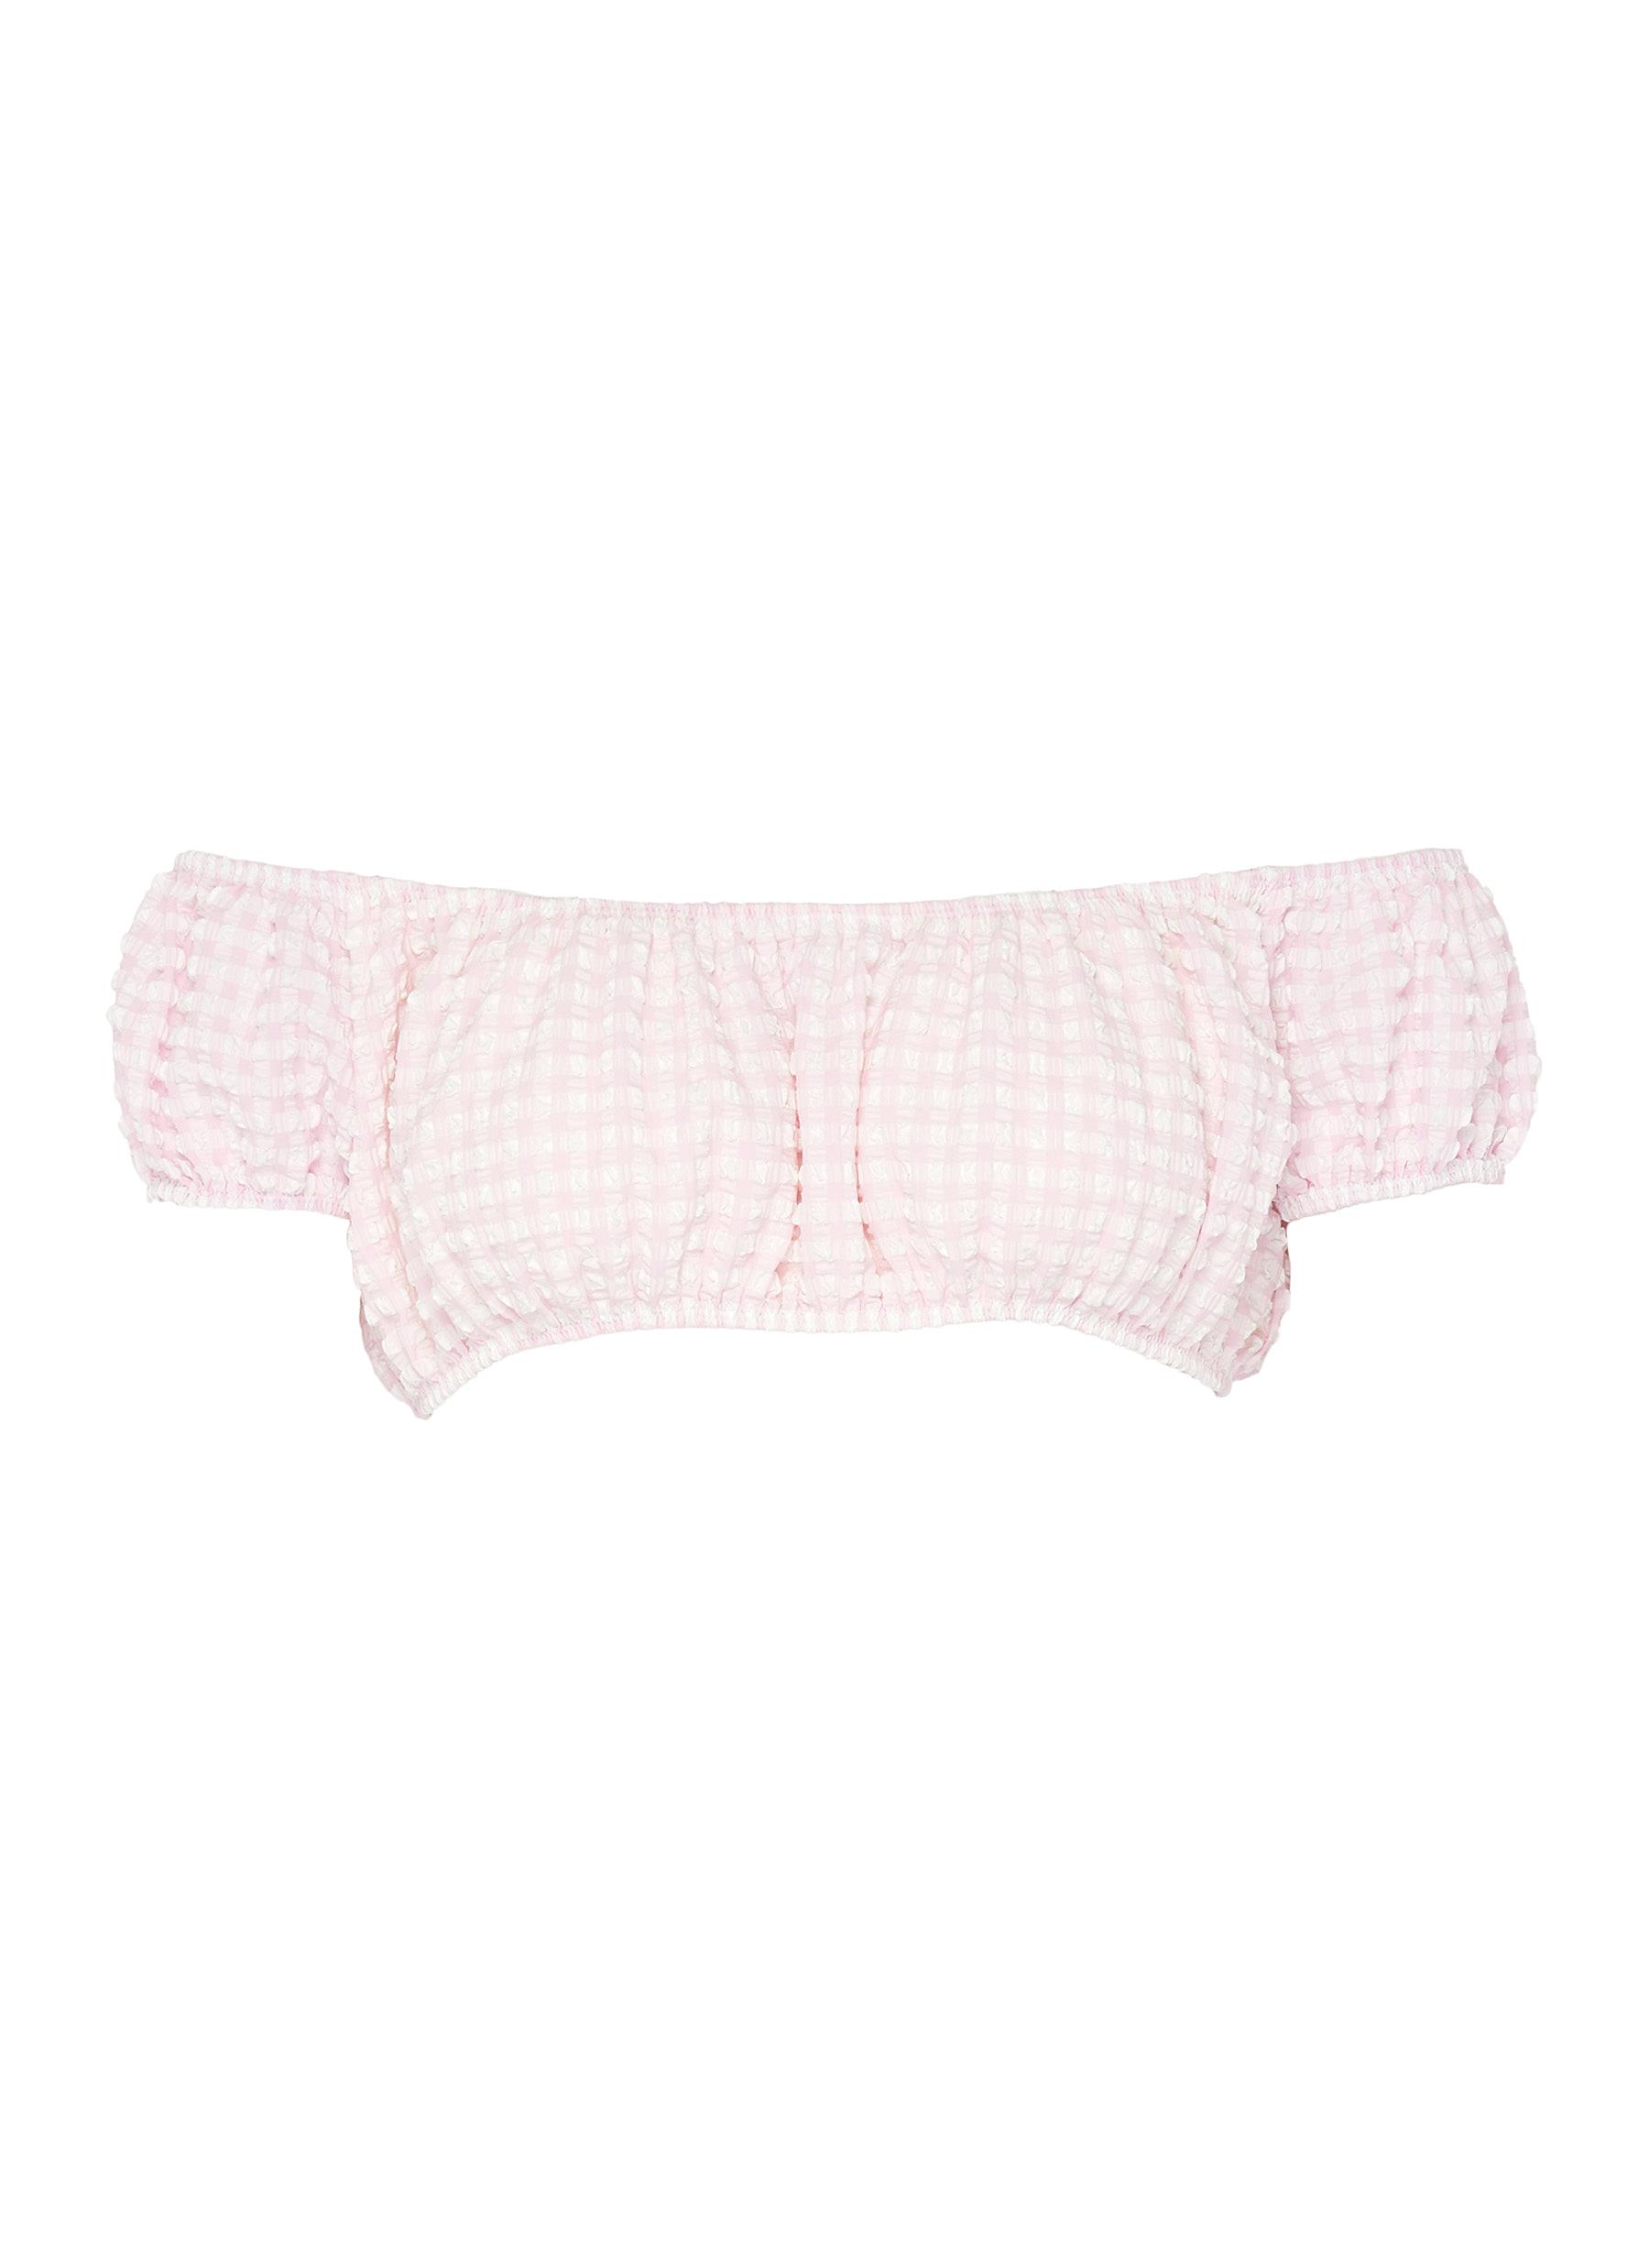 The Eloise gingham check seersucker off-shoulder bikini top by Solid & Striped